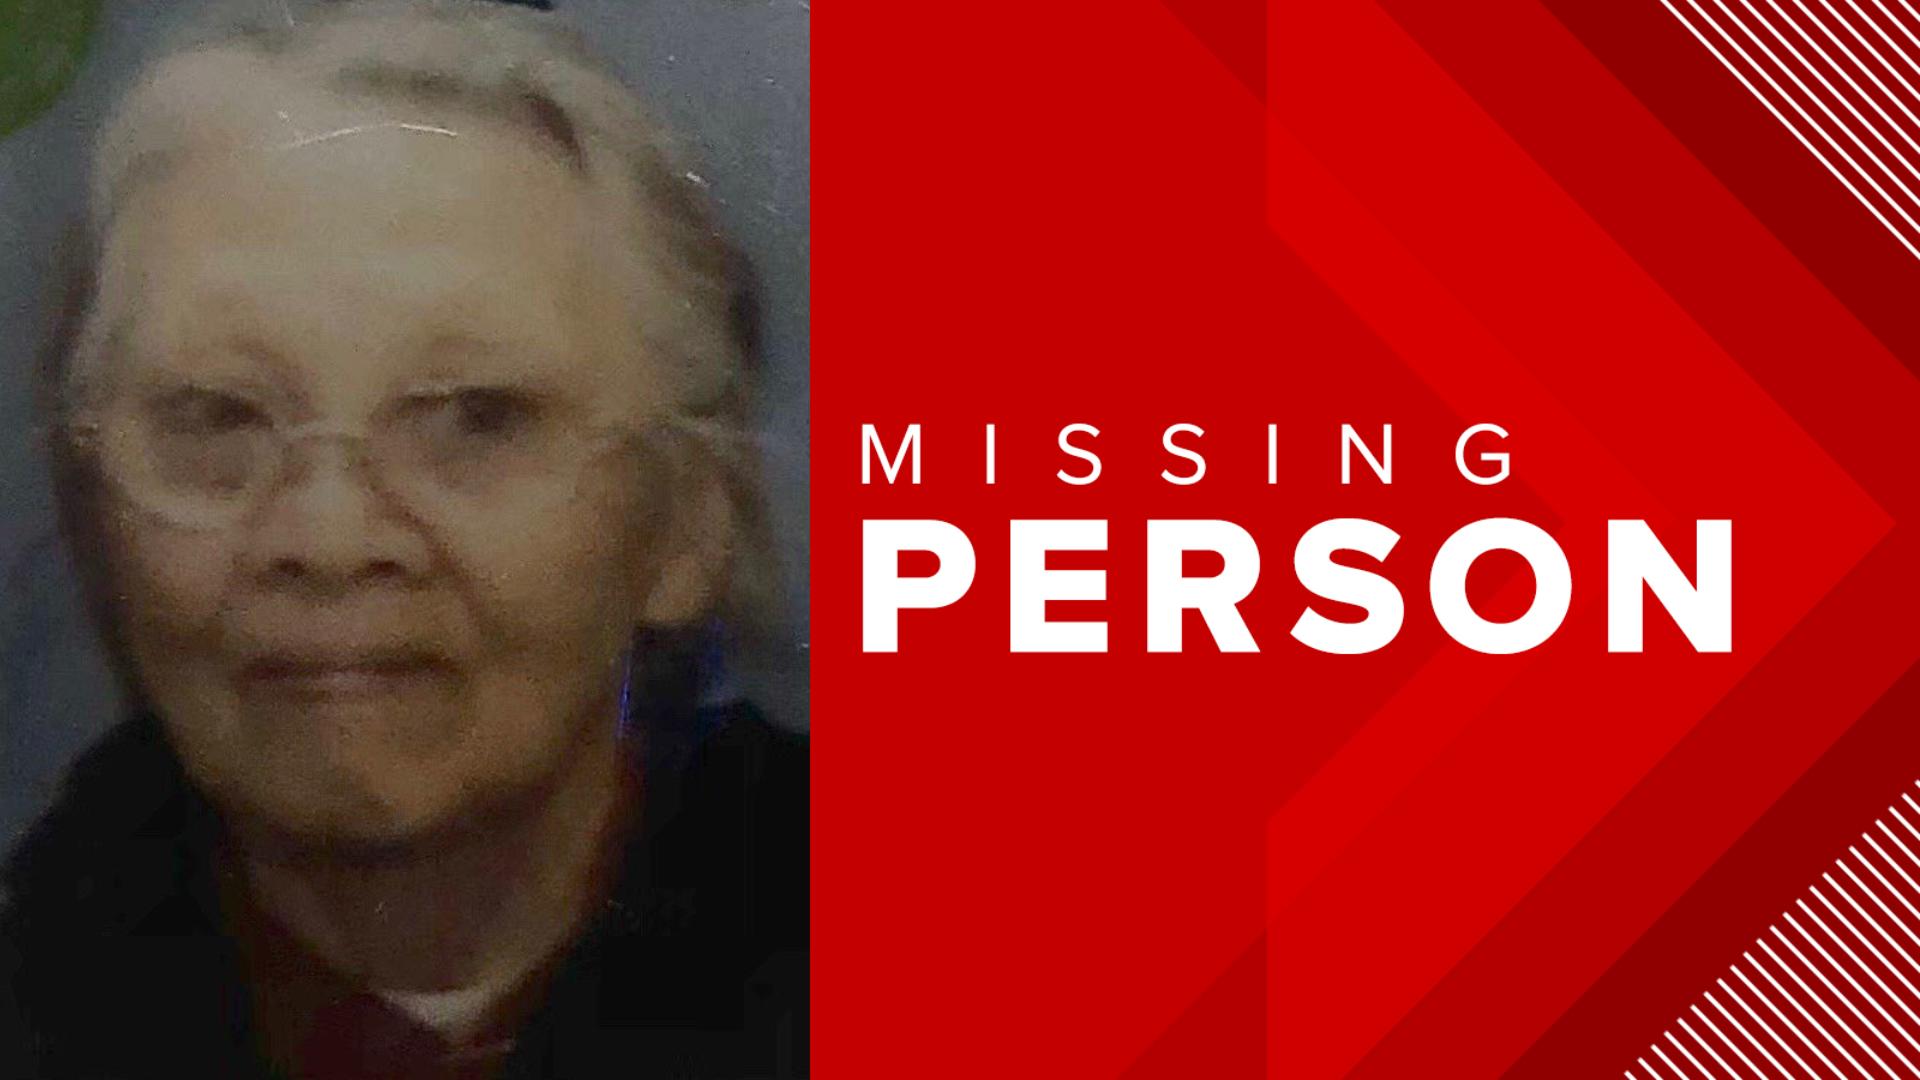 MISSING 92yearold woman from Prince County